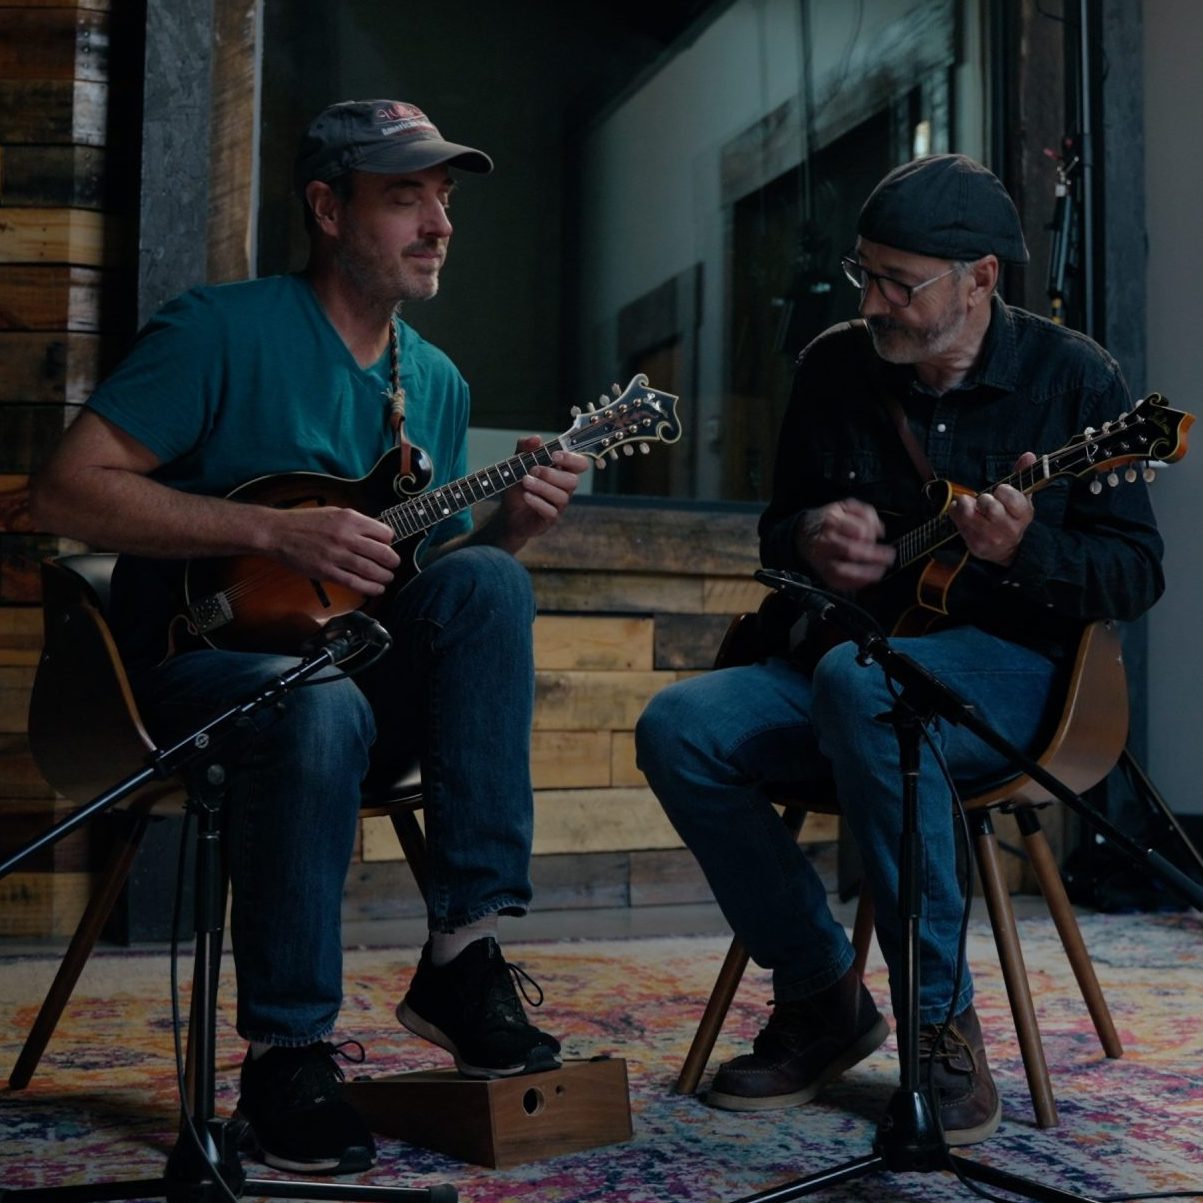 LIVE AT LUCKY BARN: Billy Strings & Don Julin, 'Meet Me at the Creek'